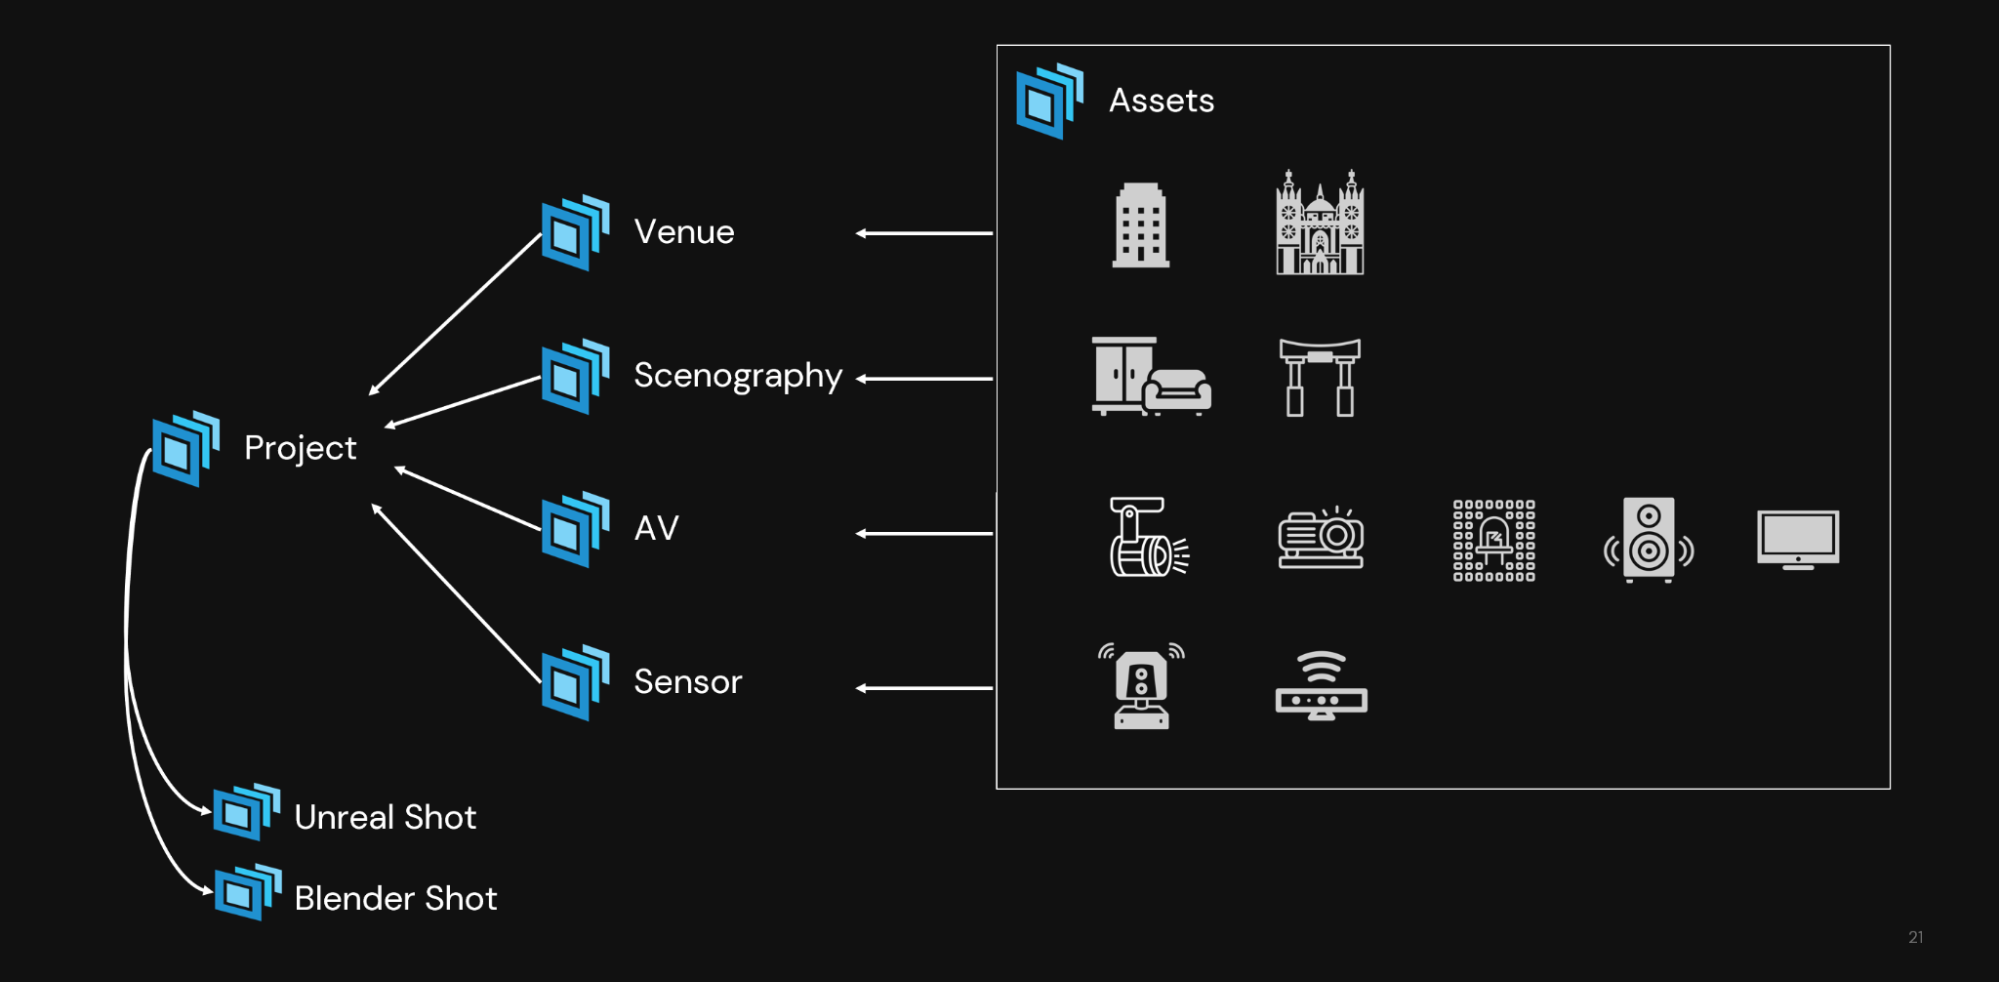 Diagram of USD scenes composition, including nondestructive layers such as venue, scenography, AV, and sensor data from diverse data sources.